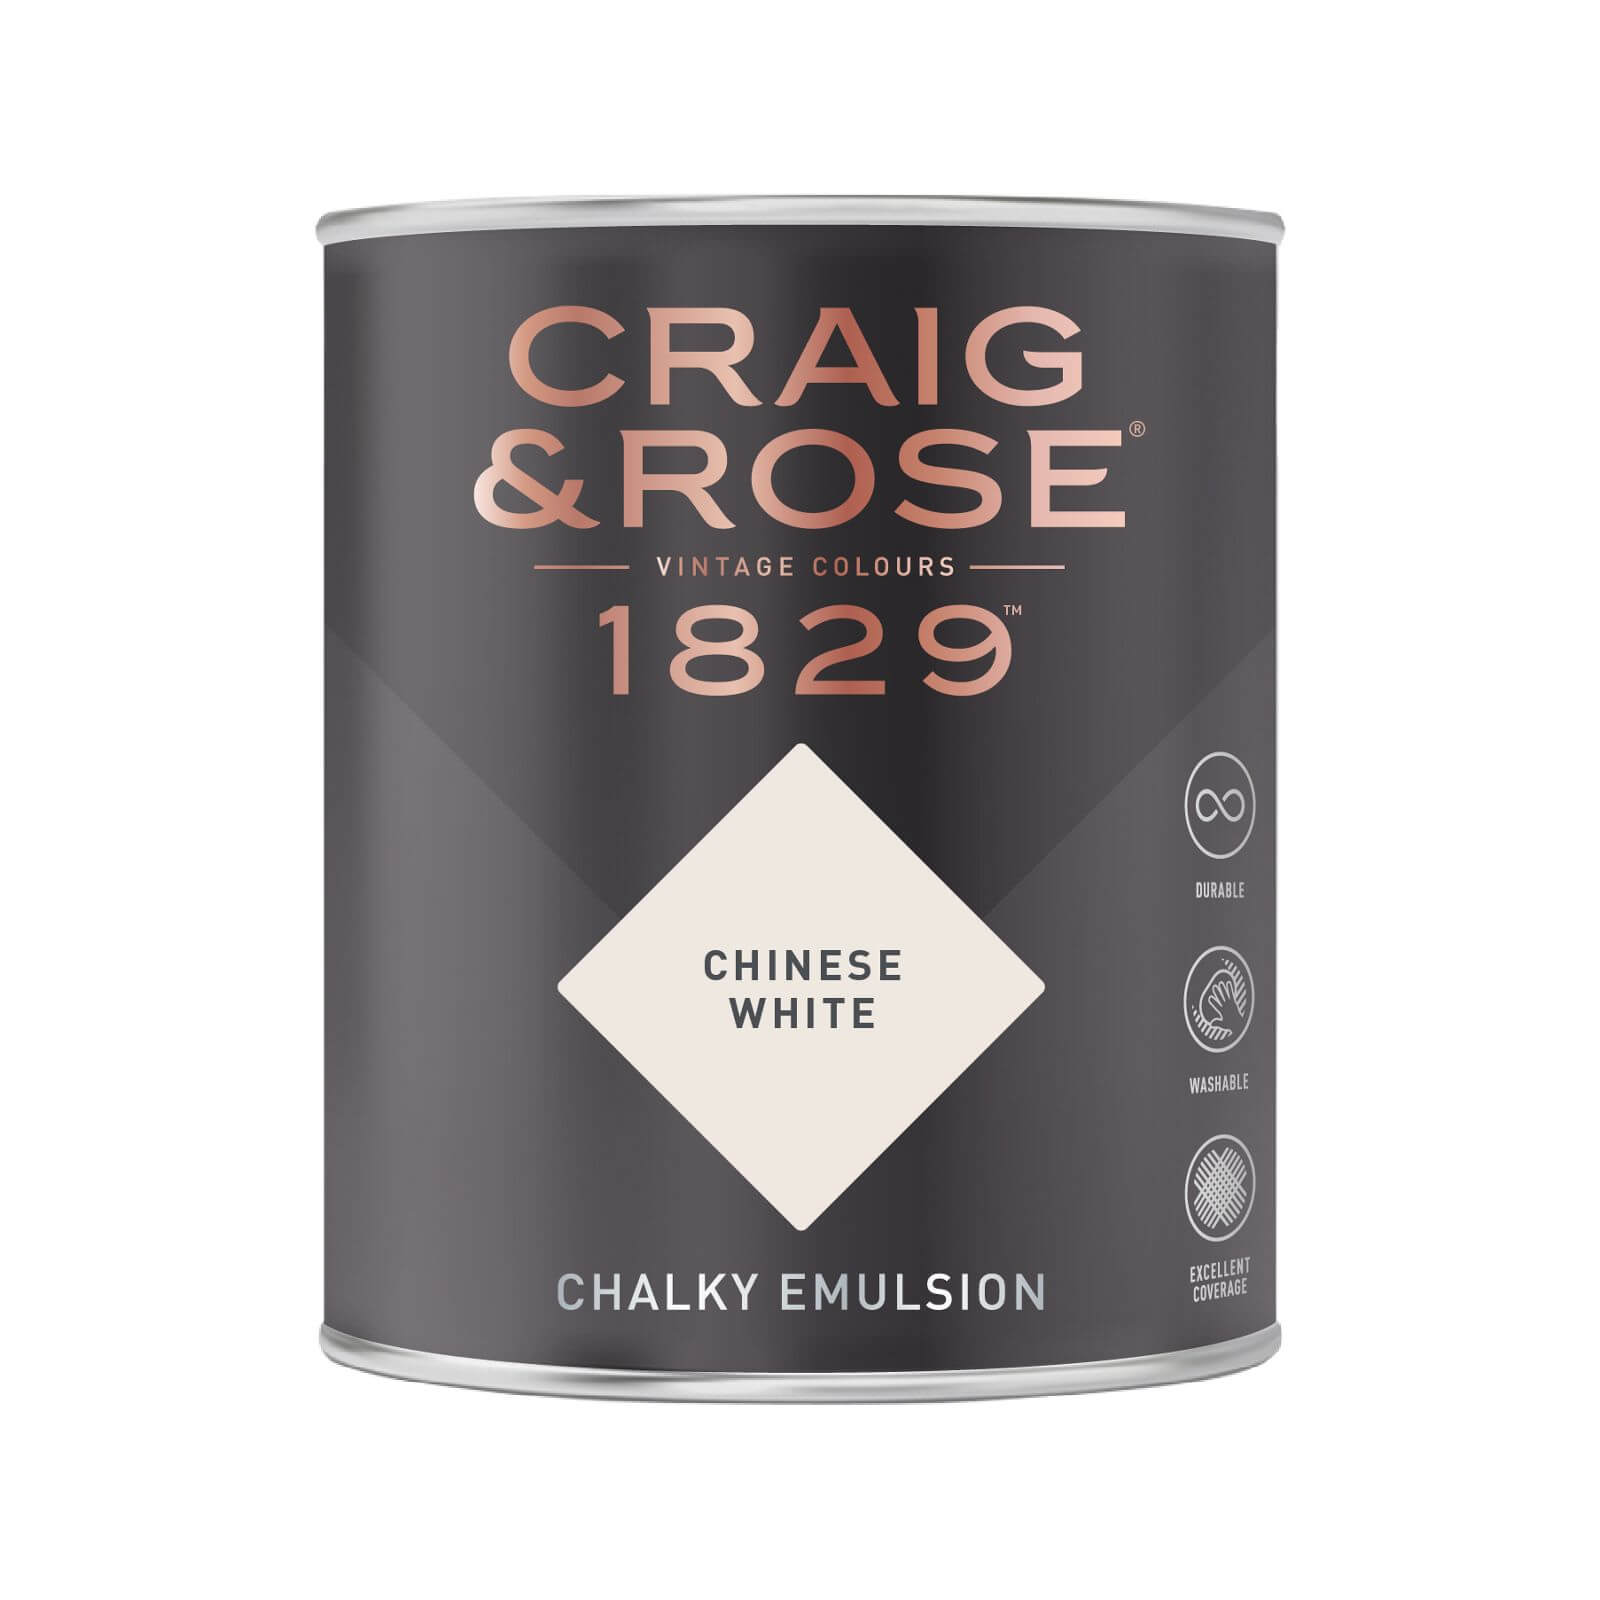 Craig & Rose 1829 Chalky Emulsion Paint Chinese White - 750ml